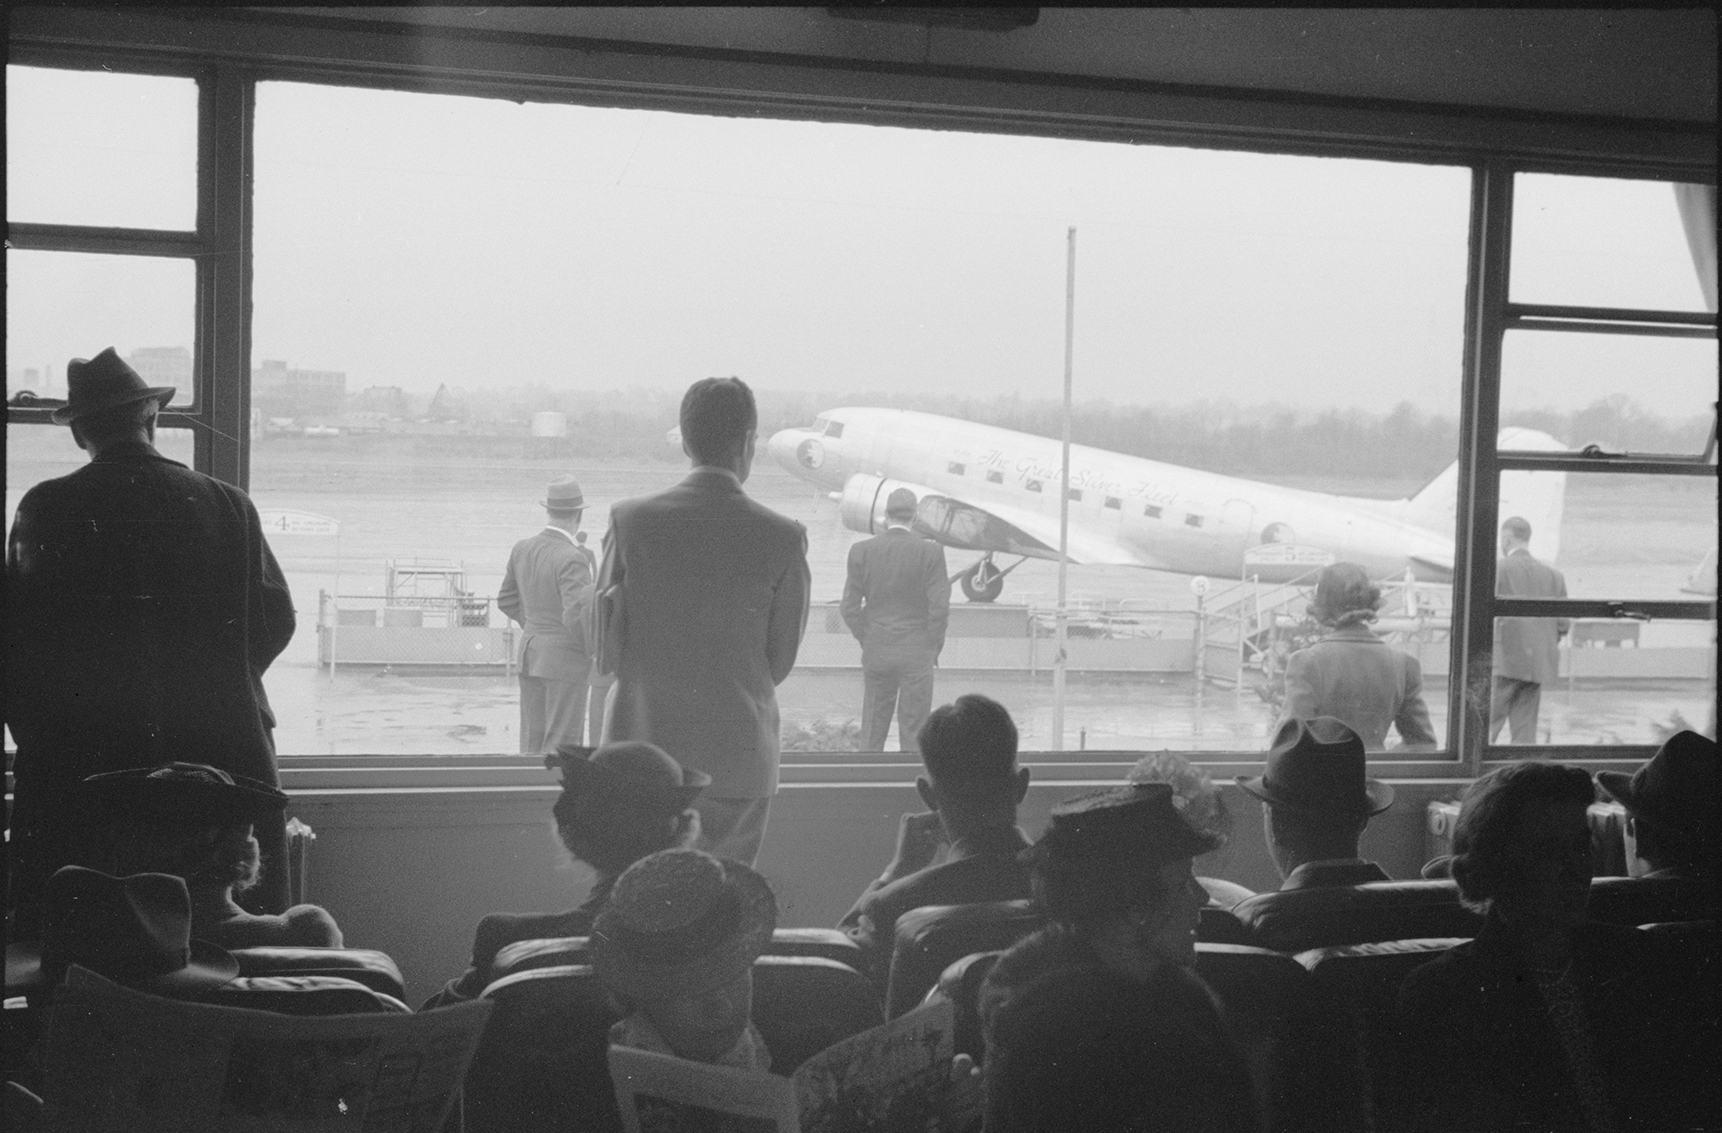 a group of travelers wait in an airport gate and watch out the windows to the runway